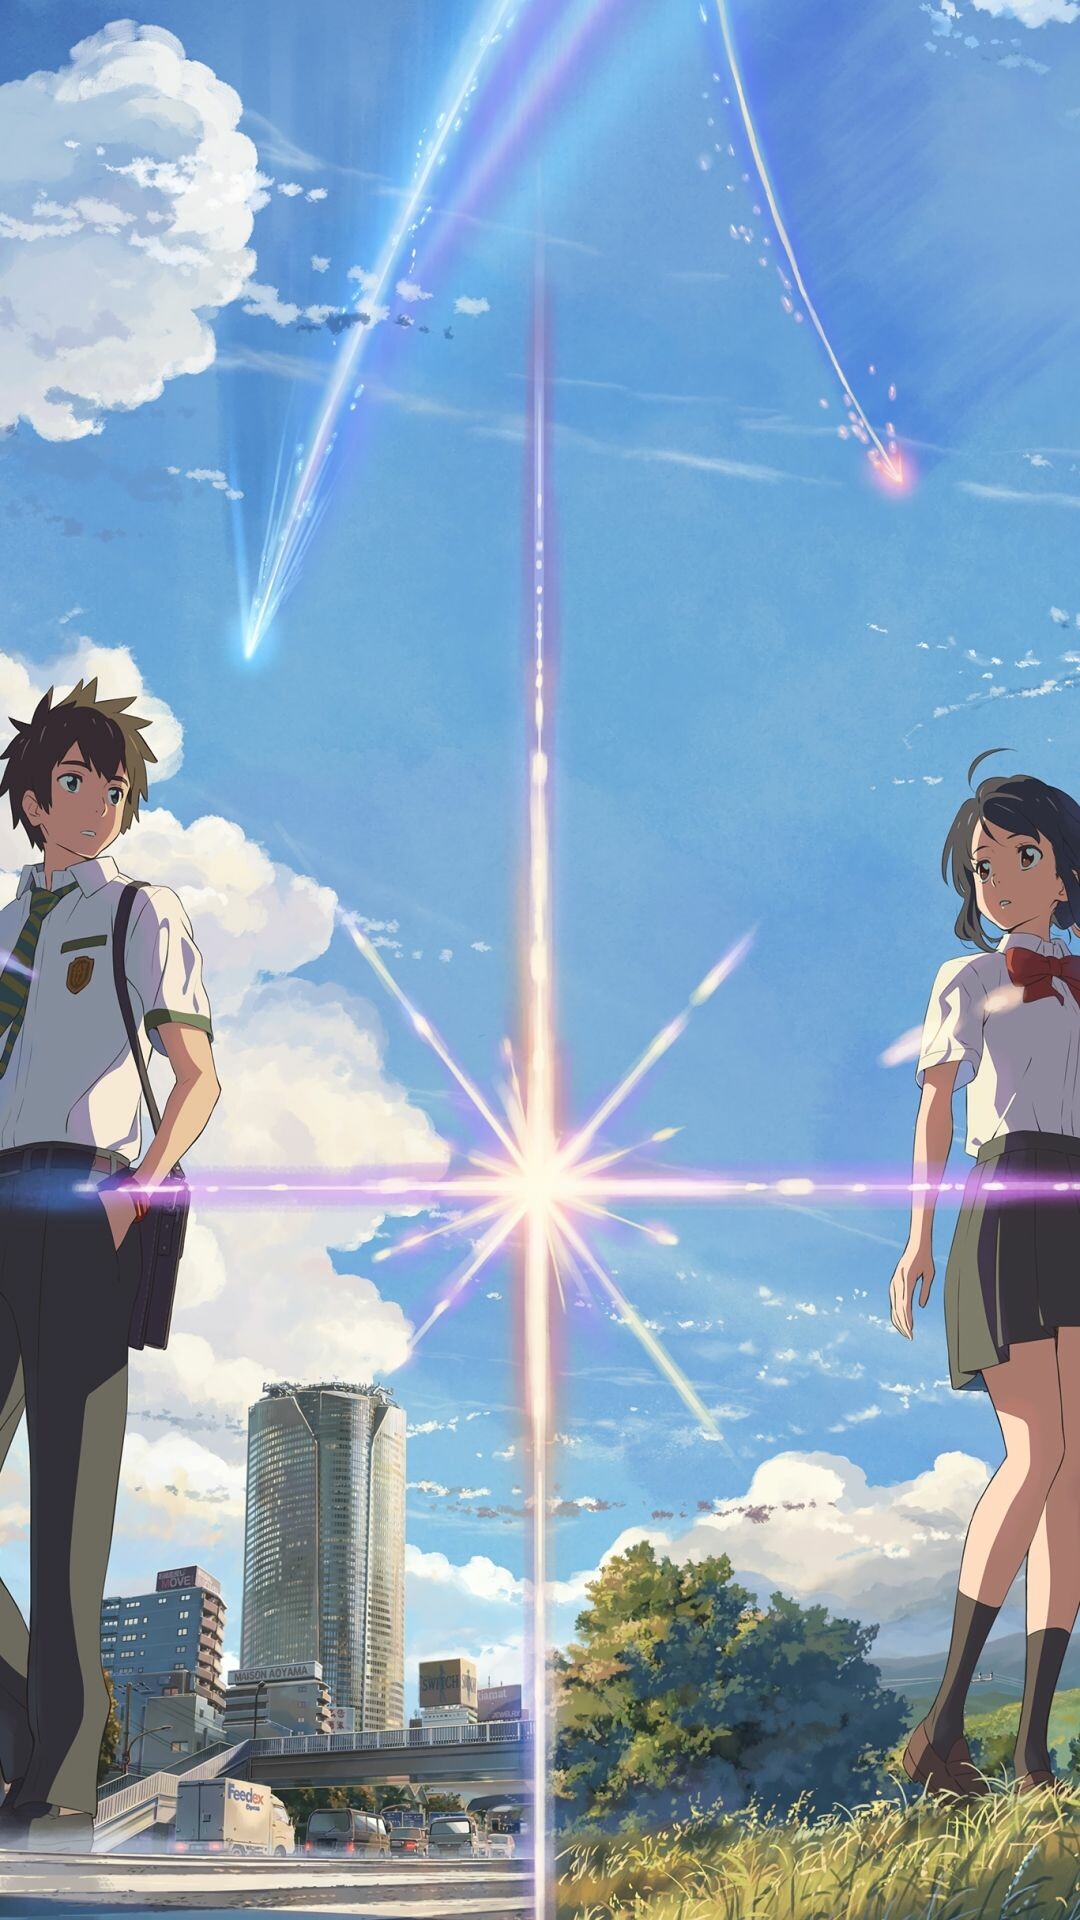 50 Your Name Anime Wallpapers Hd 4k 5k For Pc And Mobile Download Free Images For Iphone Android